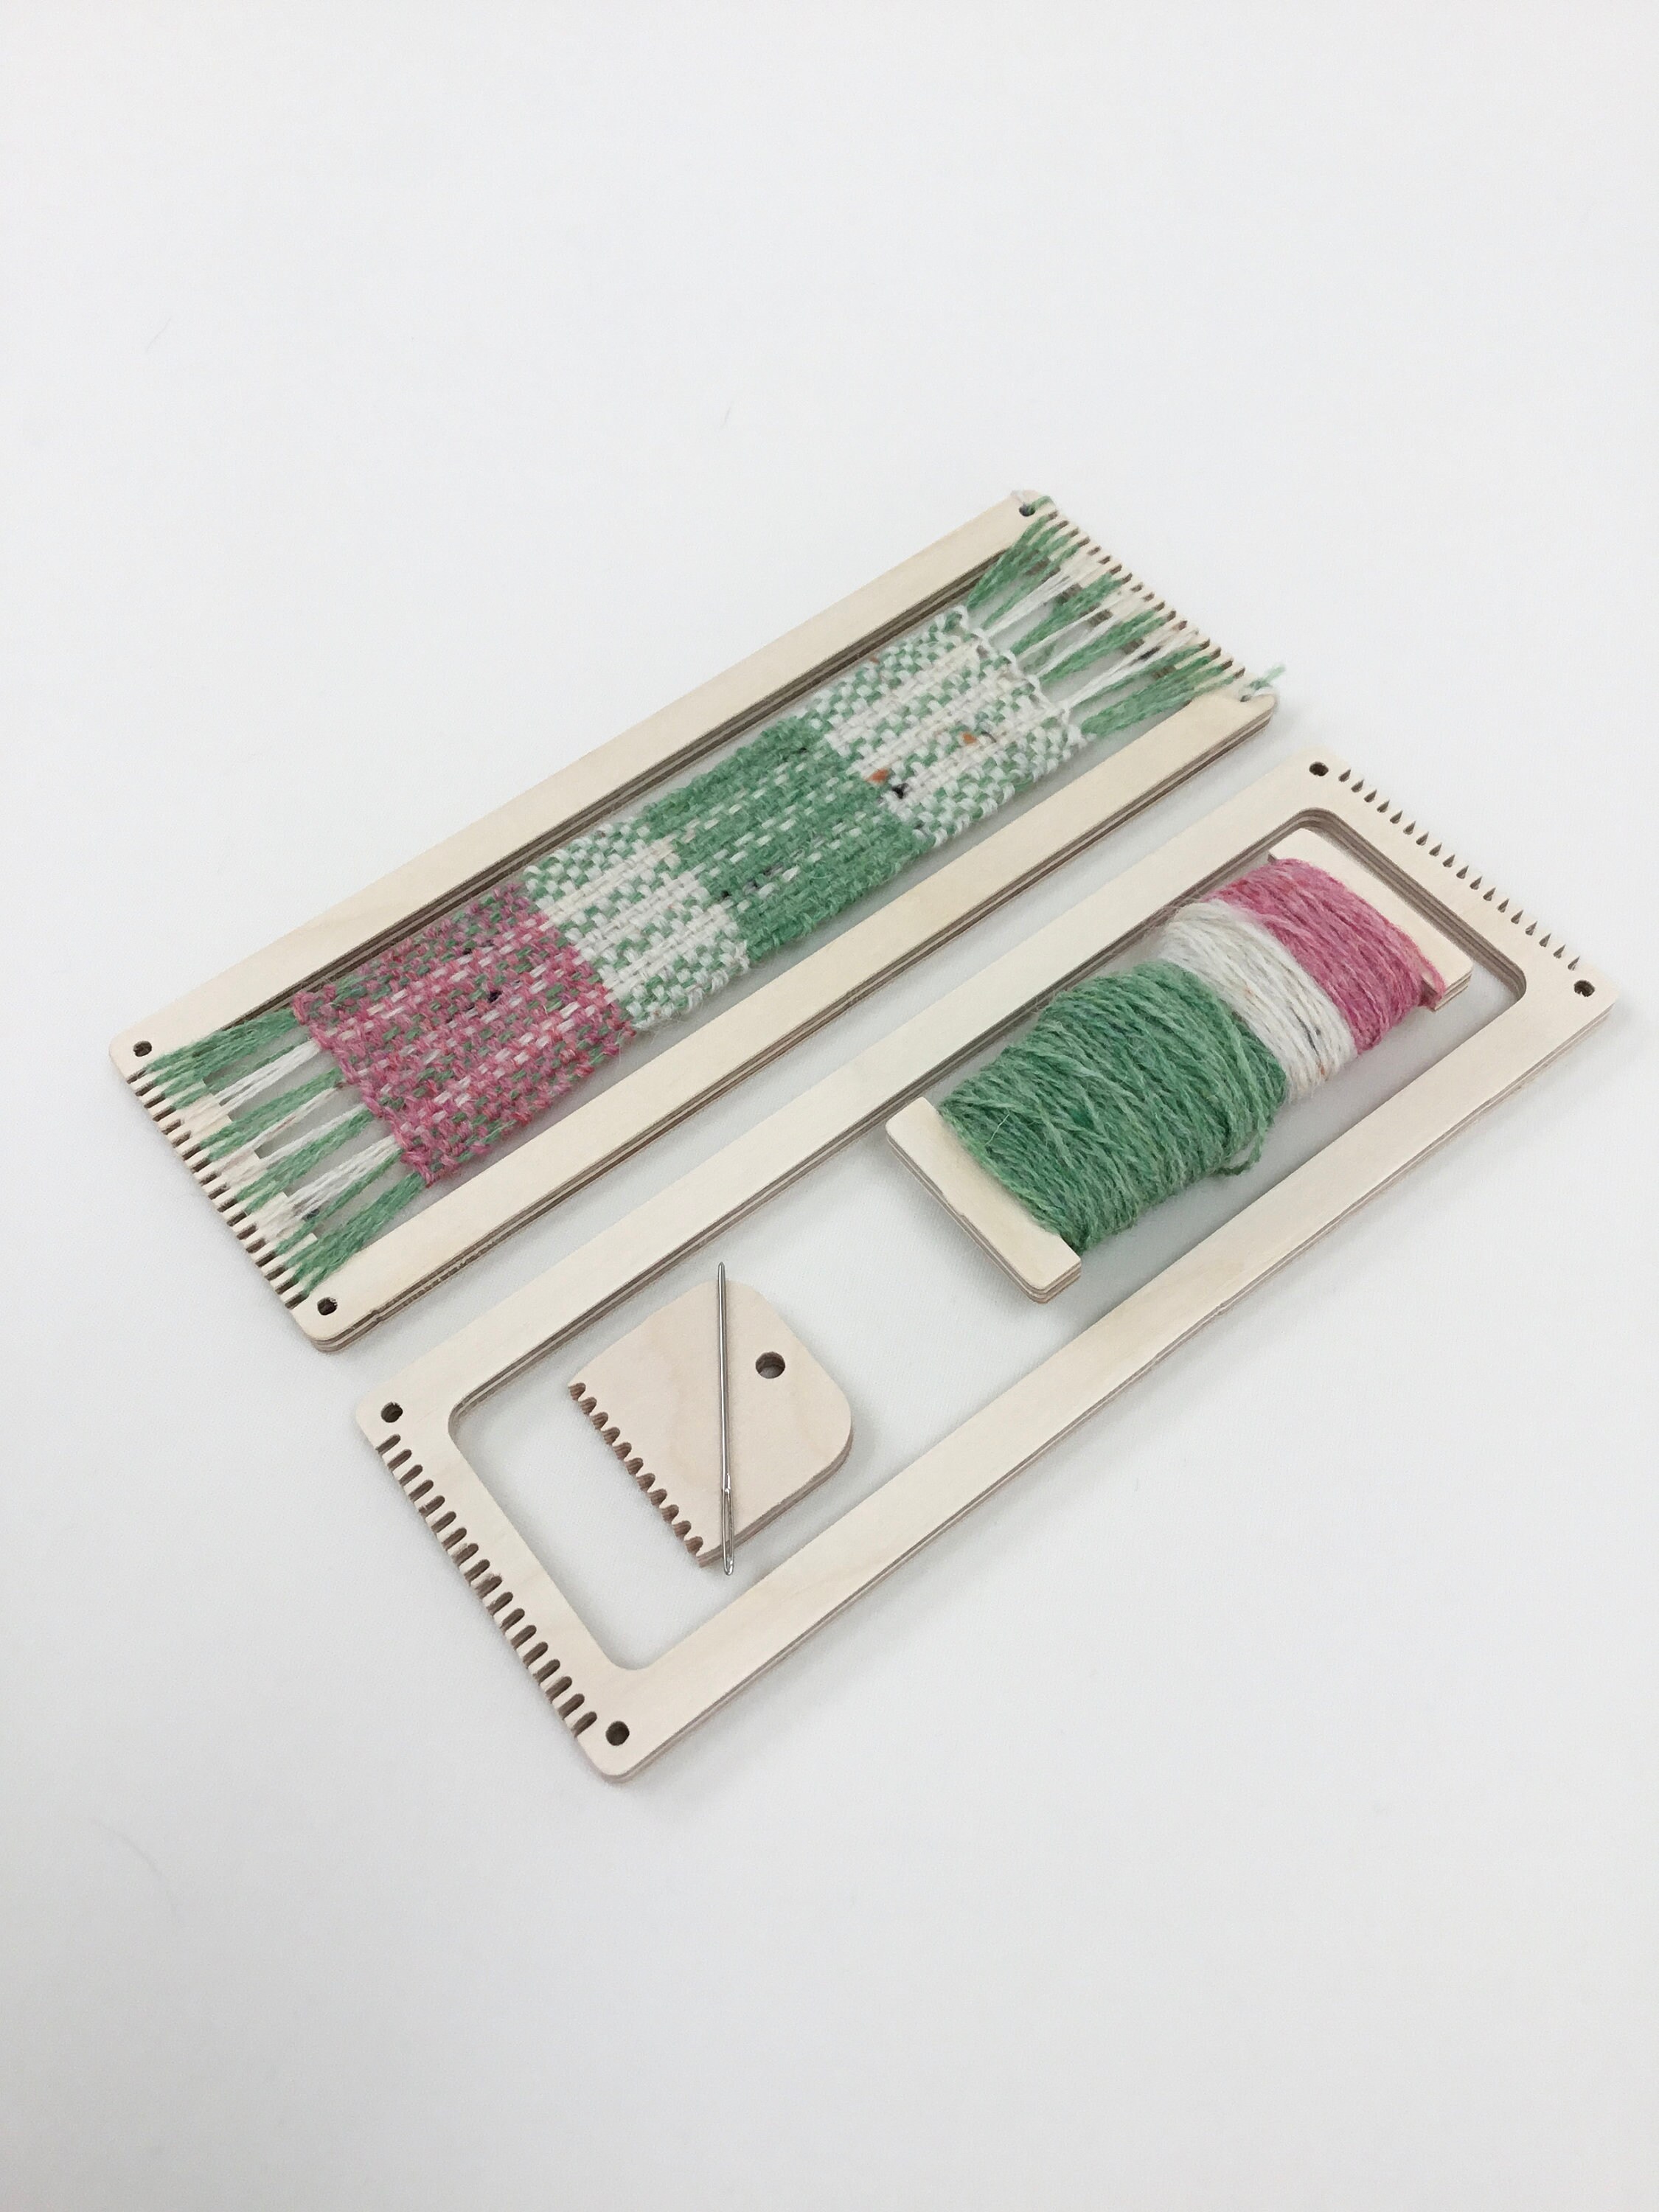 Bookmark Weaving Kit, Mini Loom, Learn to Weave With Green, Pink